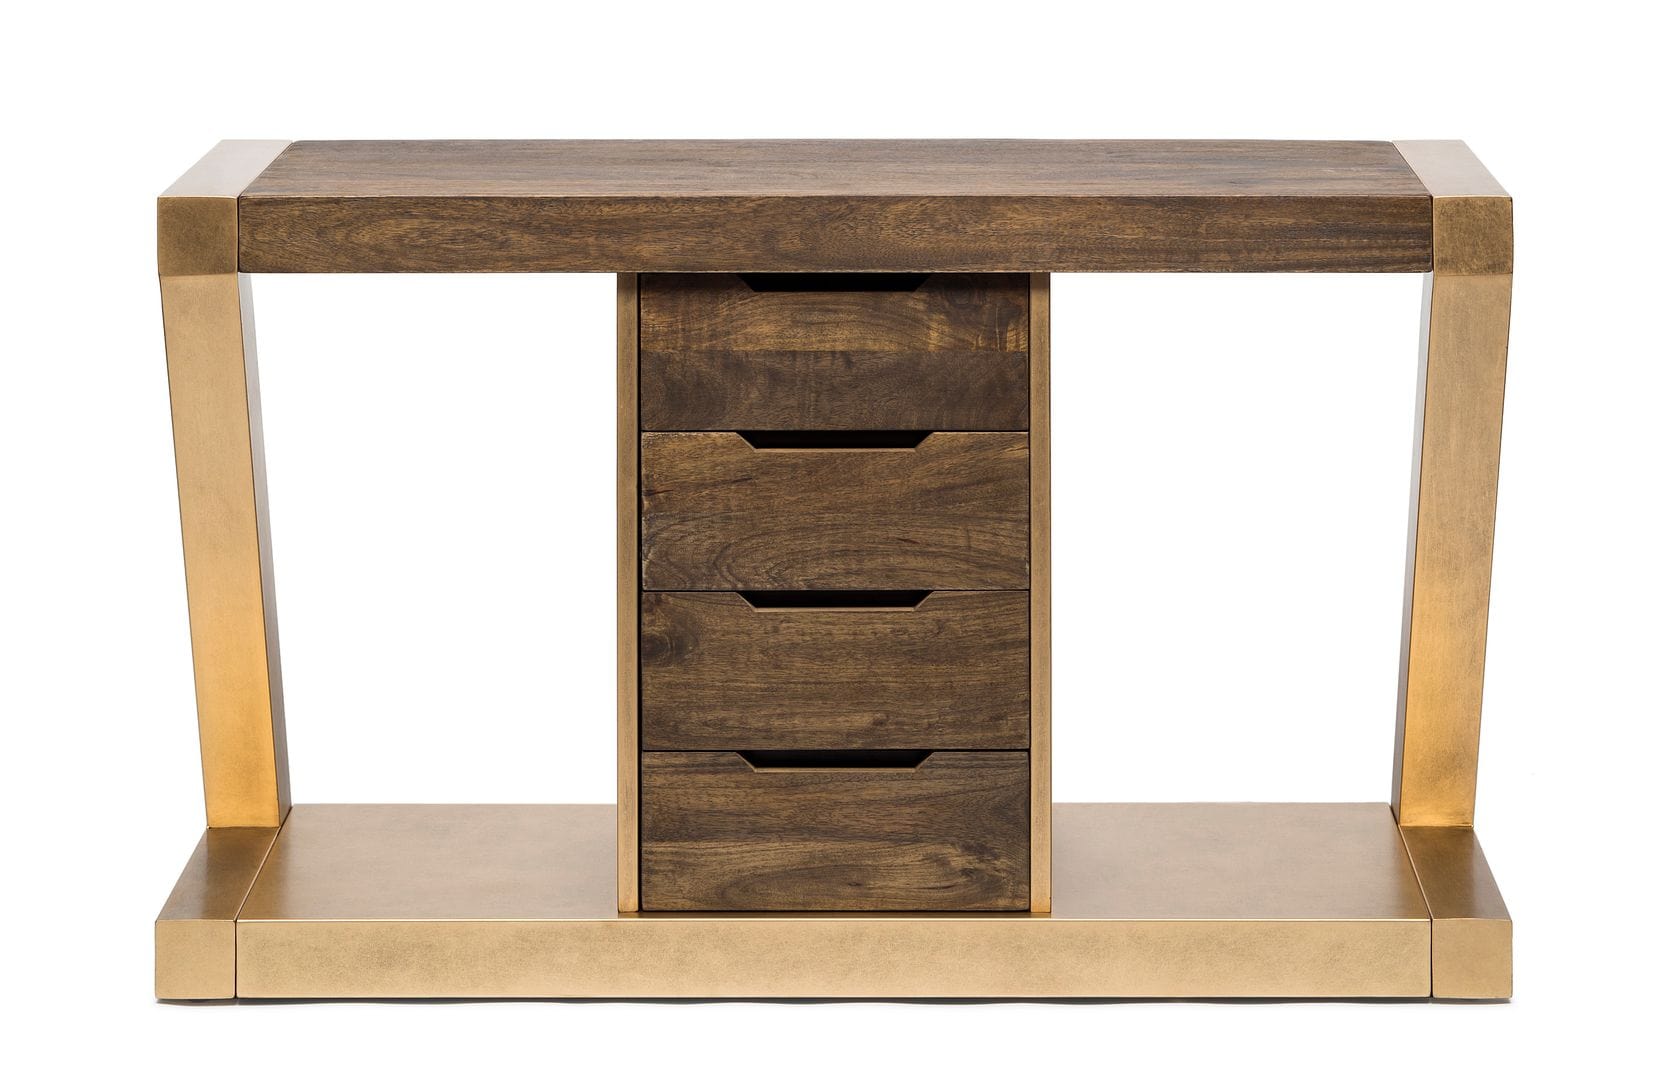 Modern Brass and Wooden Hallway Console Table with Z-Shaped Design and Drawers